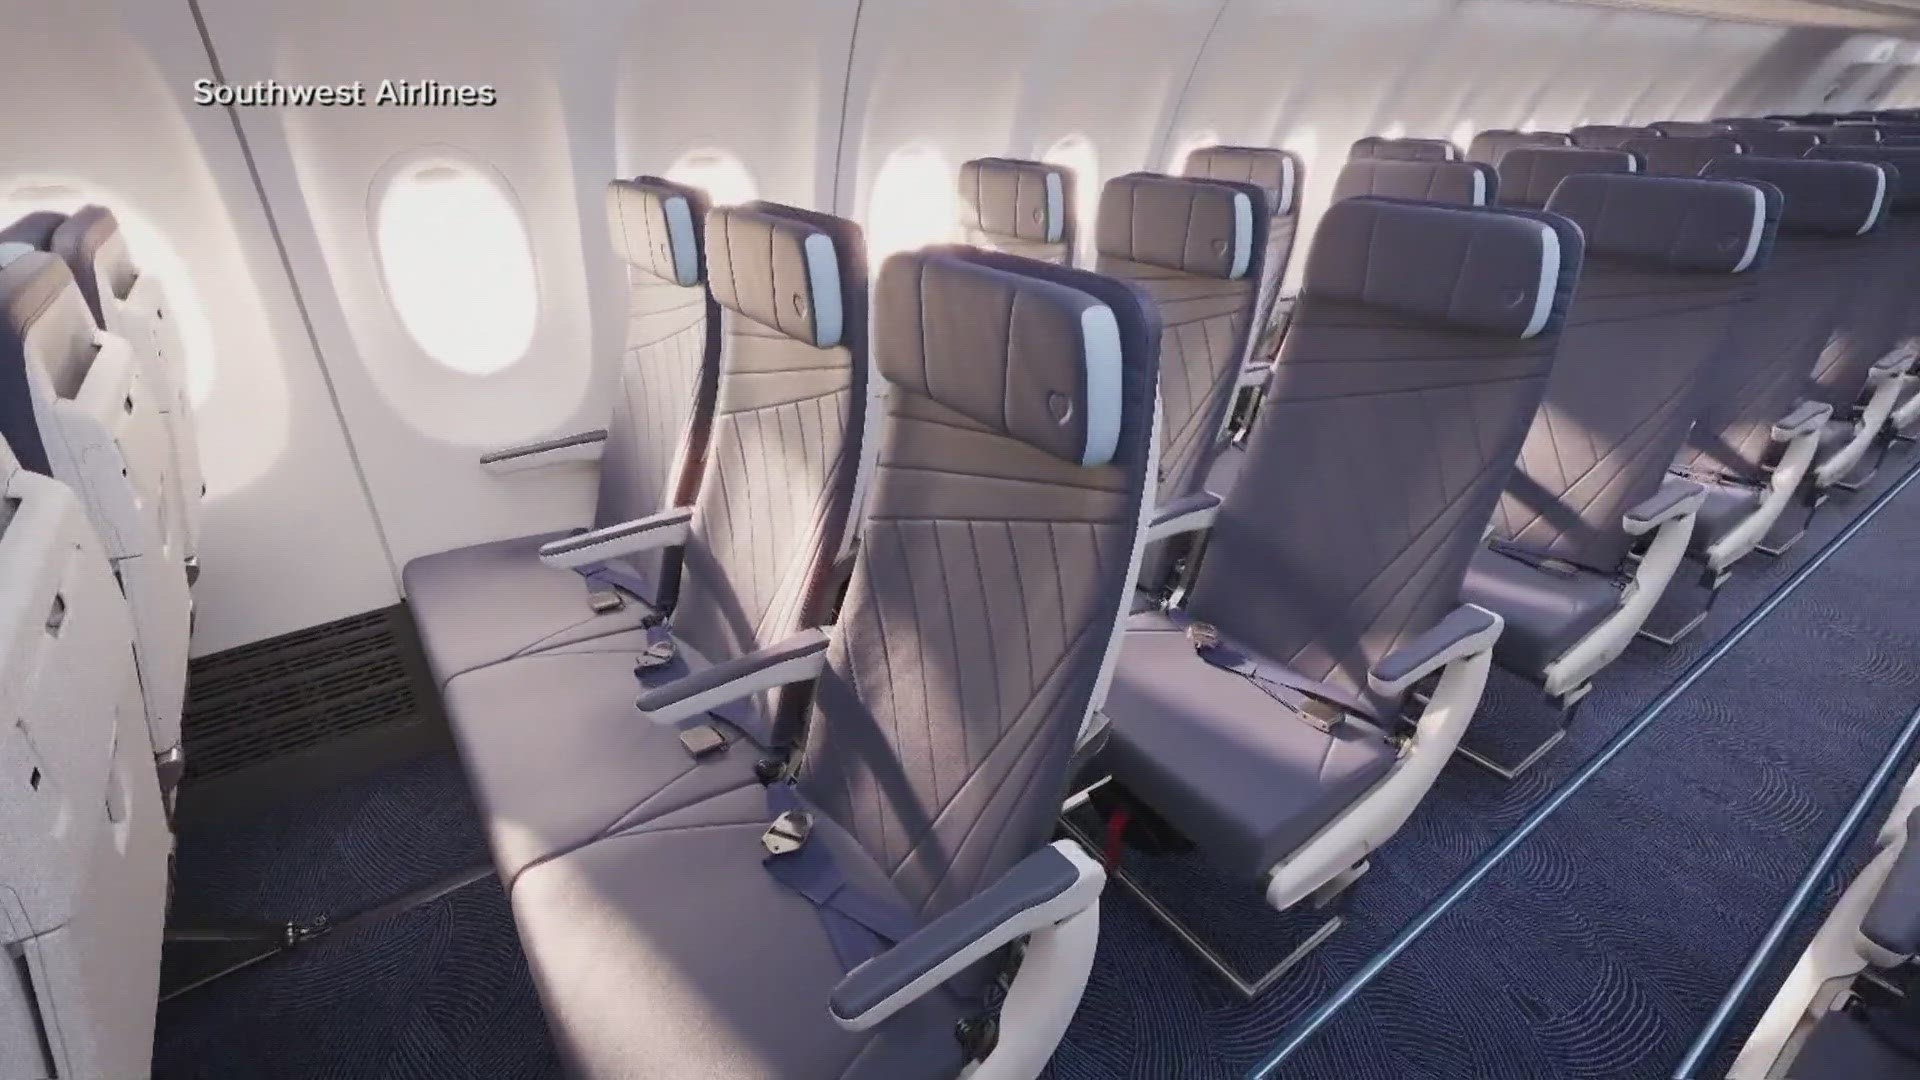 The Dallas-based airline recently debuted a new look and it's getting attention online.